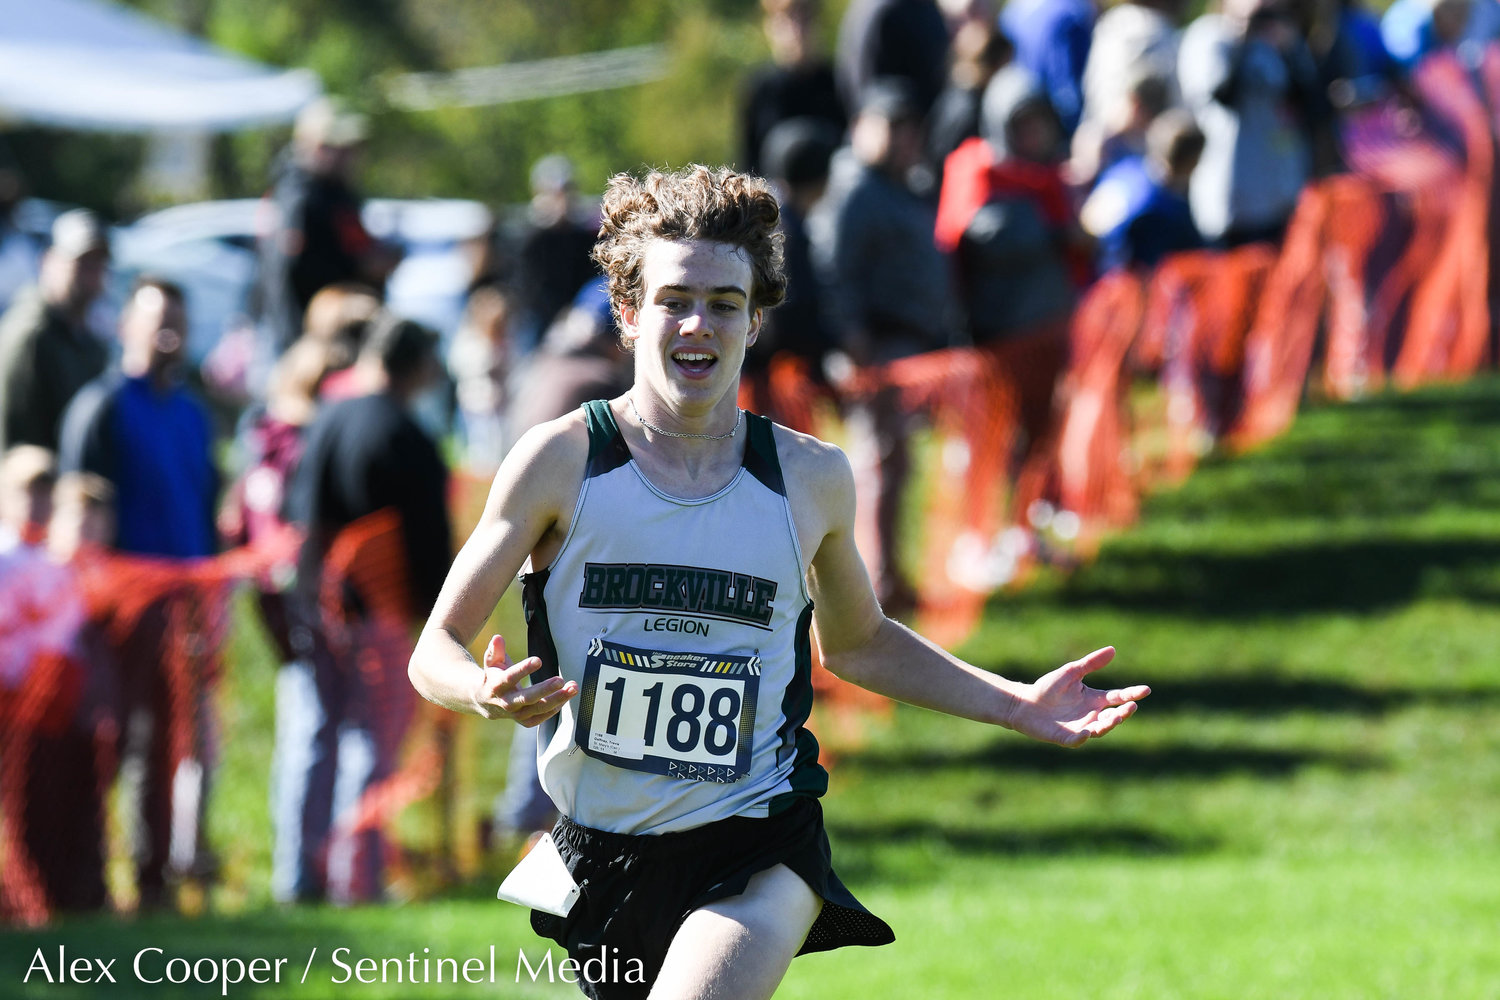 St. Mary's runner Travis Gaffney finishes in first place for varsity small schools during the 79th EJ Herrmann XC Invitational on Saturday, Sept. 24 at Proctor Park in Utica.